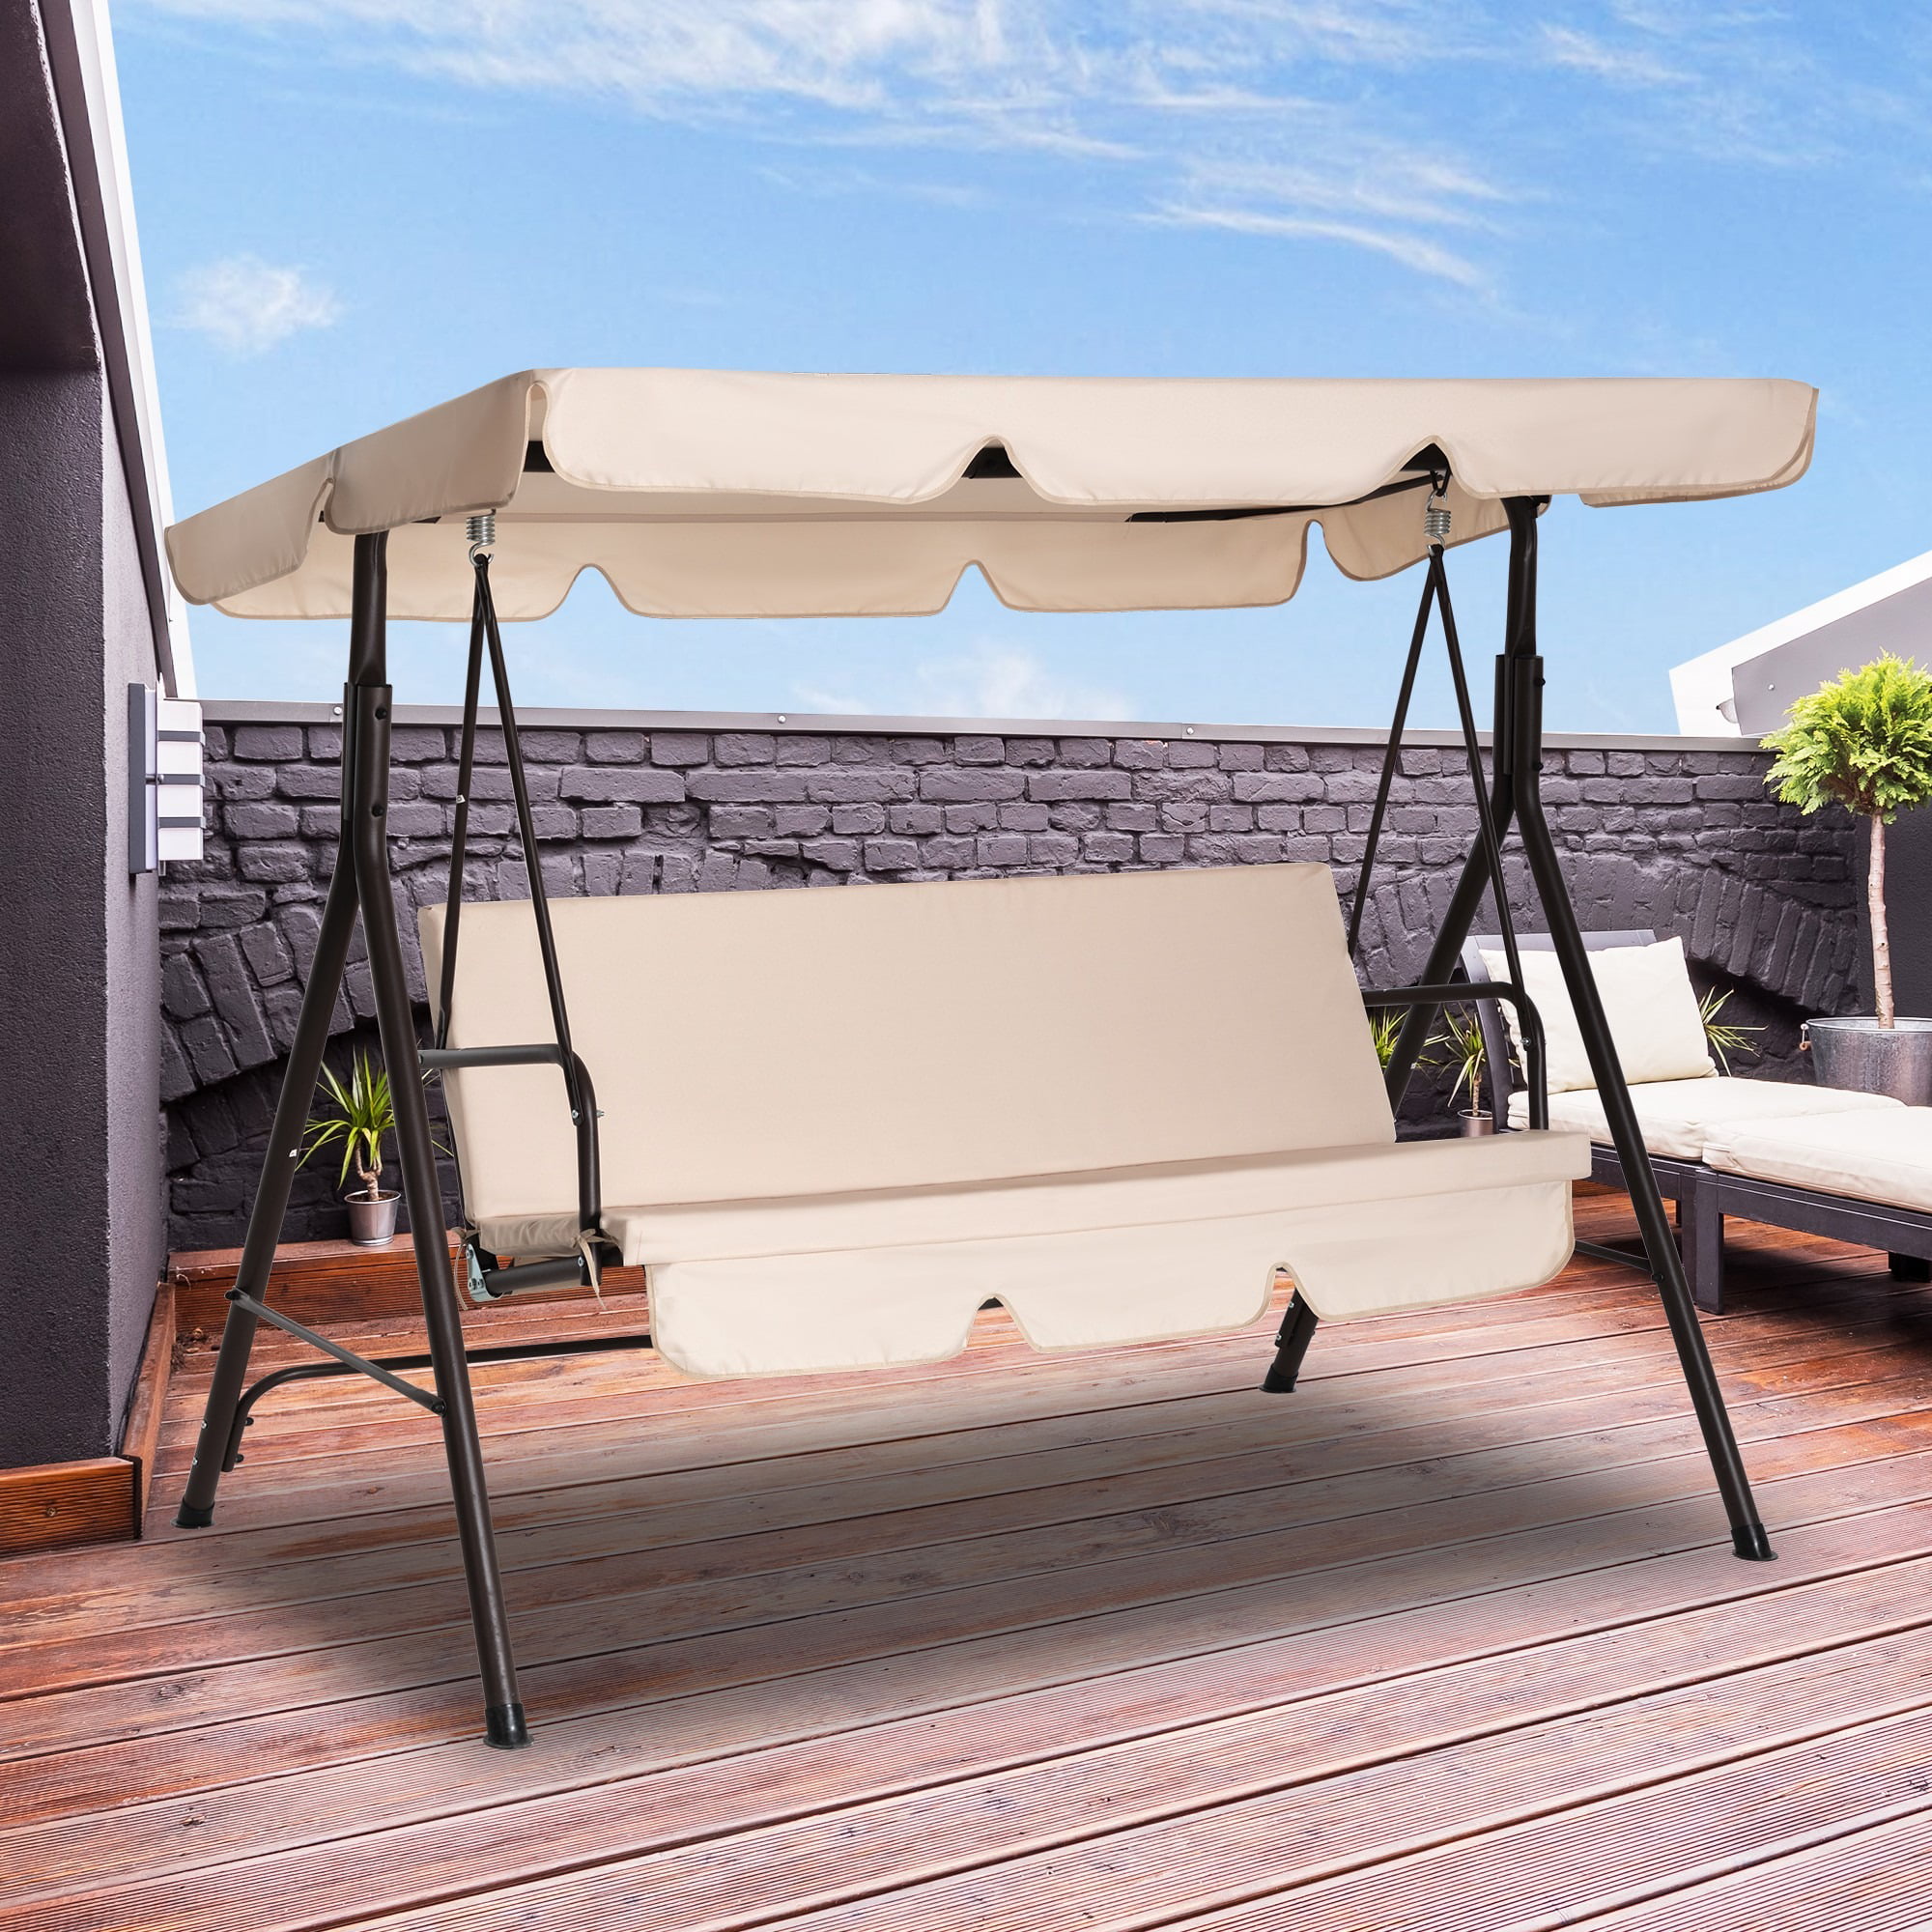 Details about   New Outdoor Porch Swing Bench Patio Chair Hanging Seat Yard Furniture Heavy Duty 